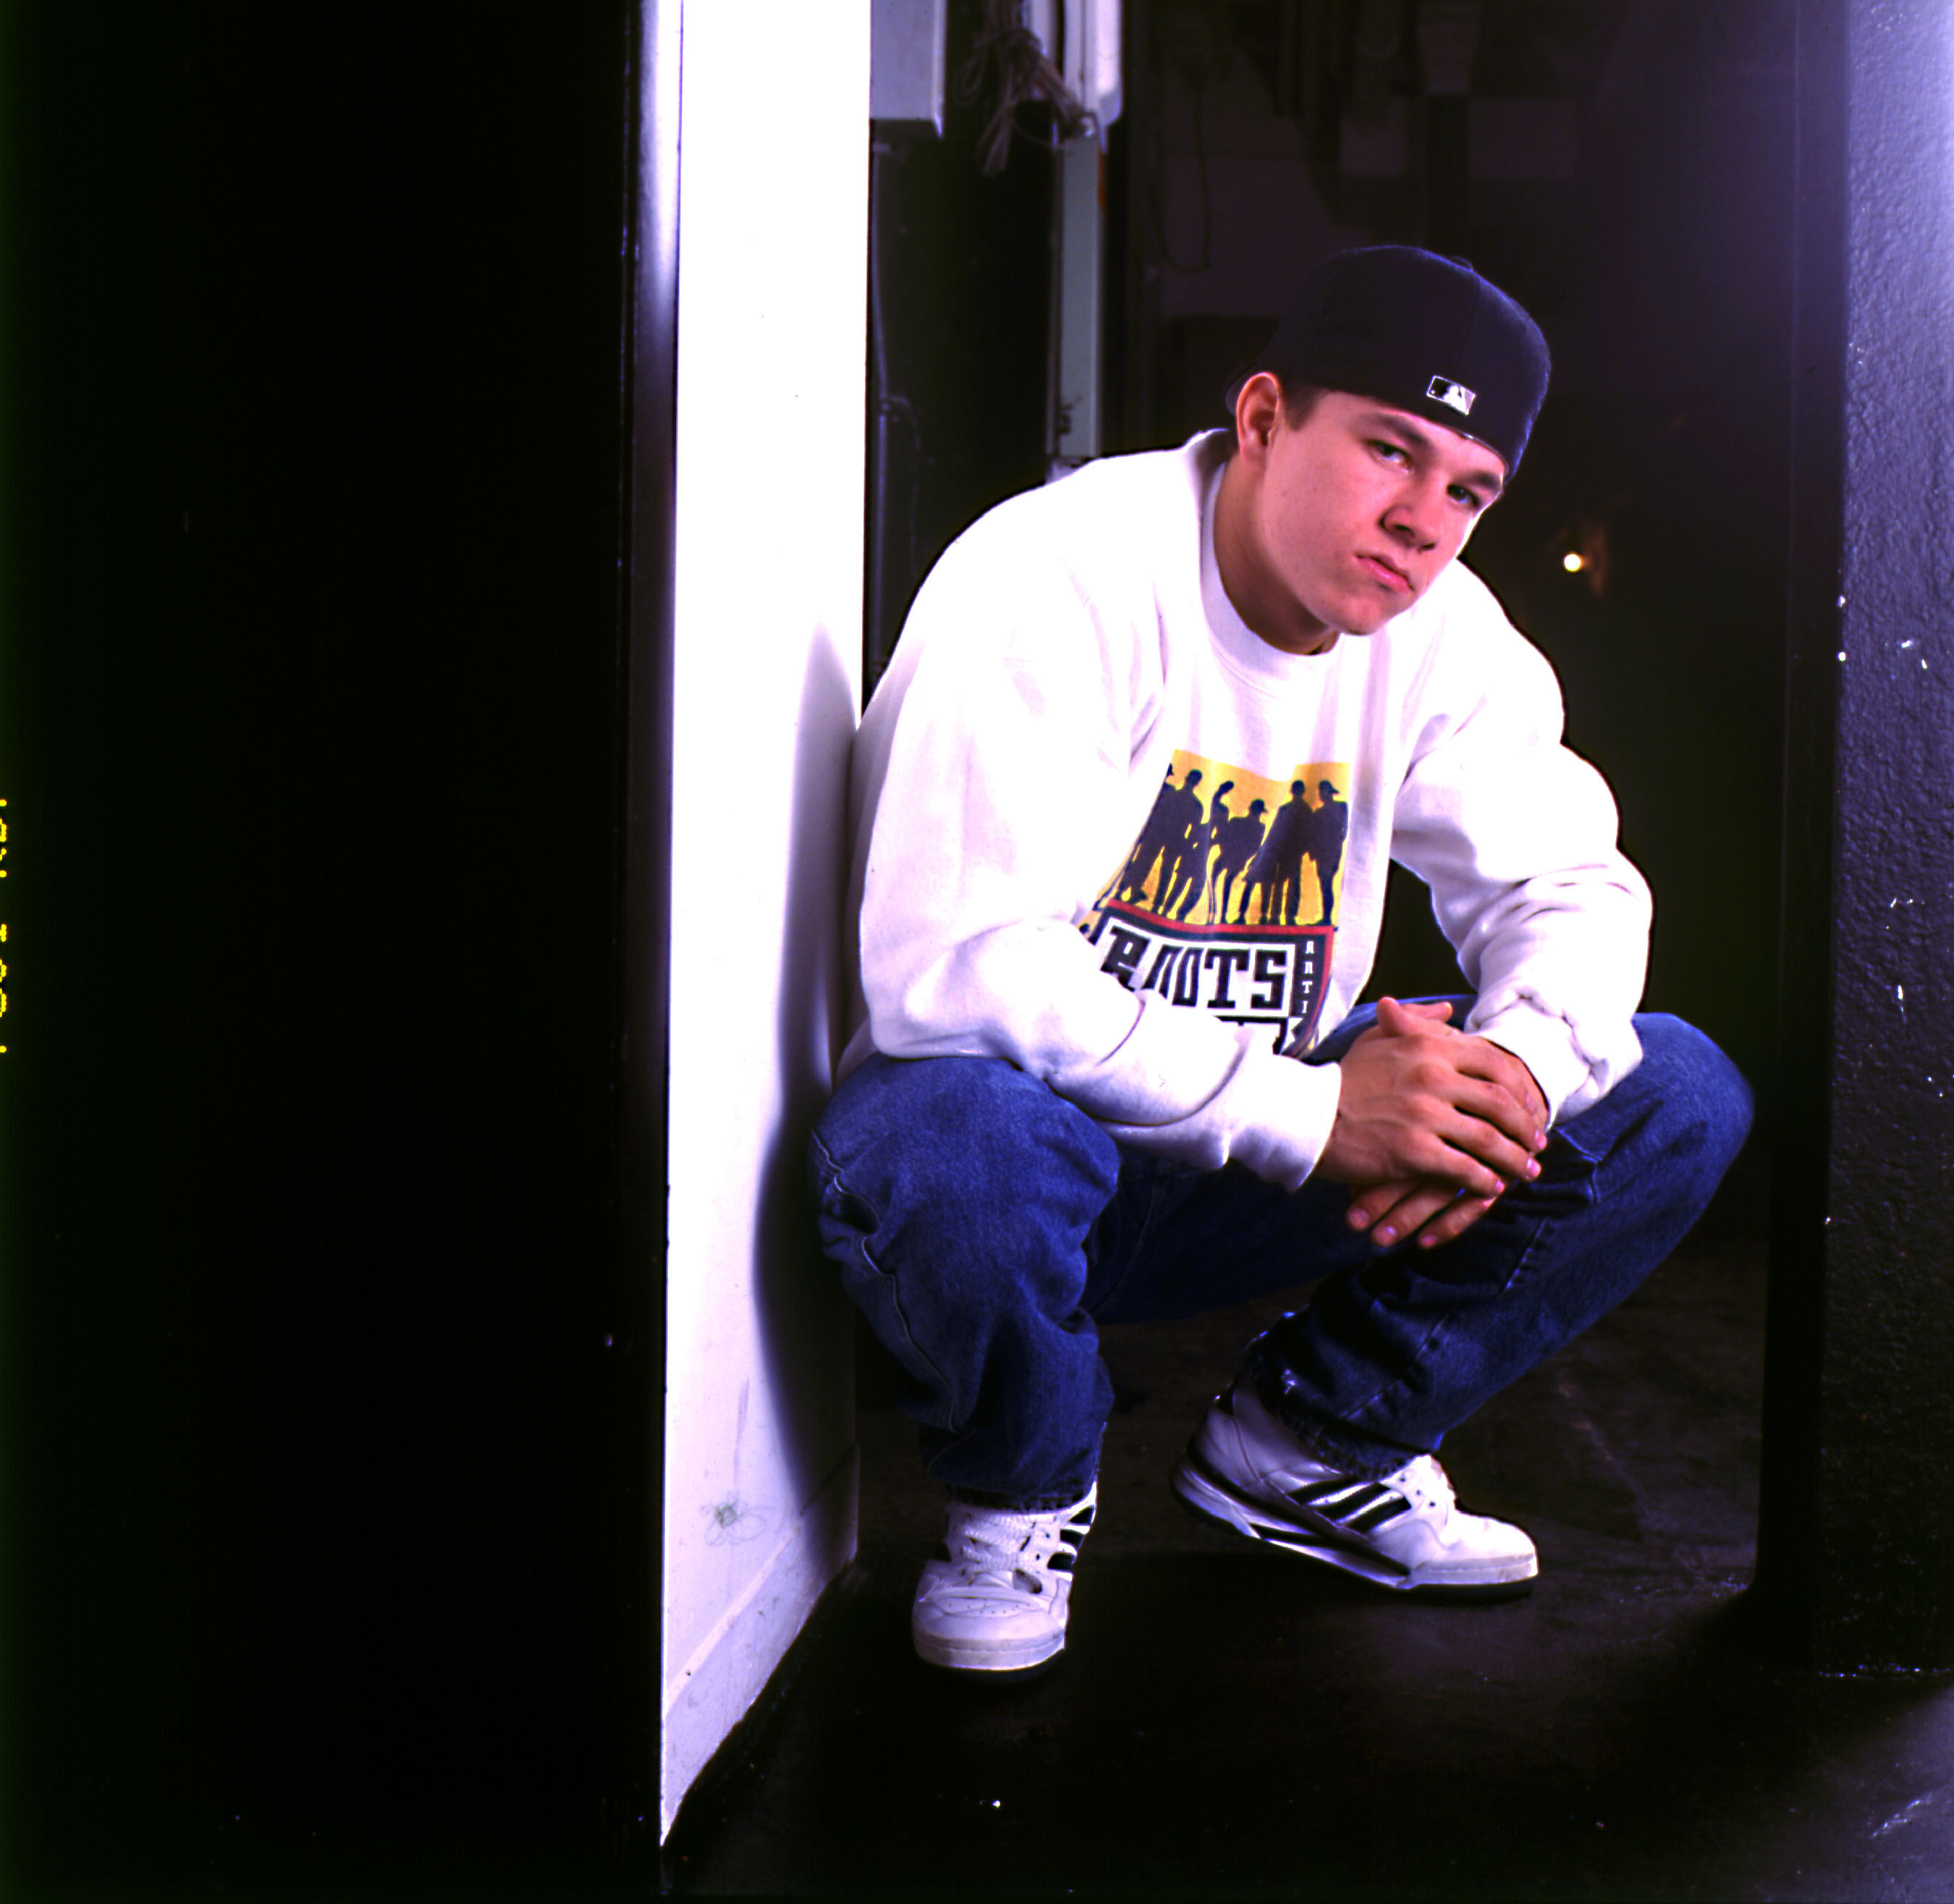 Mark Wahlberg, also known as Marky Mark, in Chicago, Illinois on October 13, 1991. | Source: Getty Images